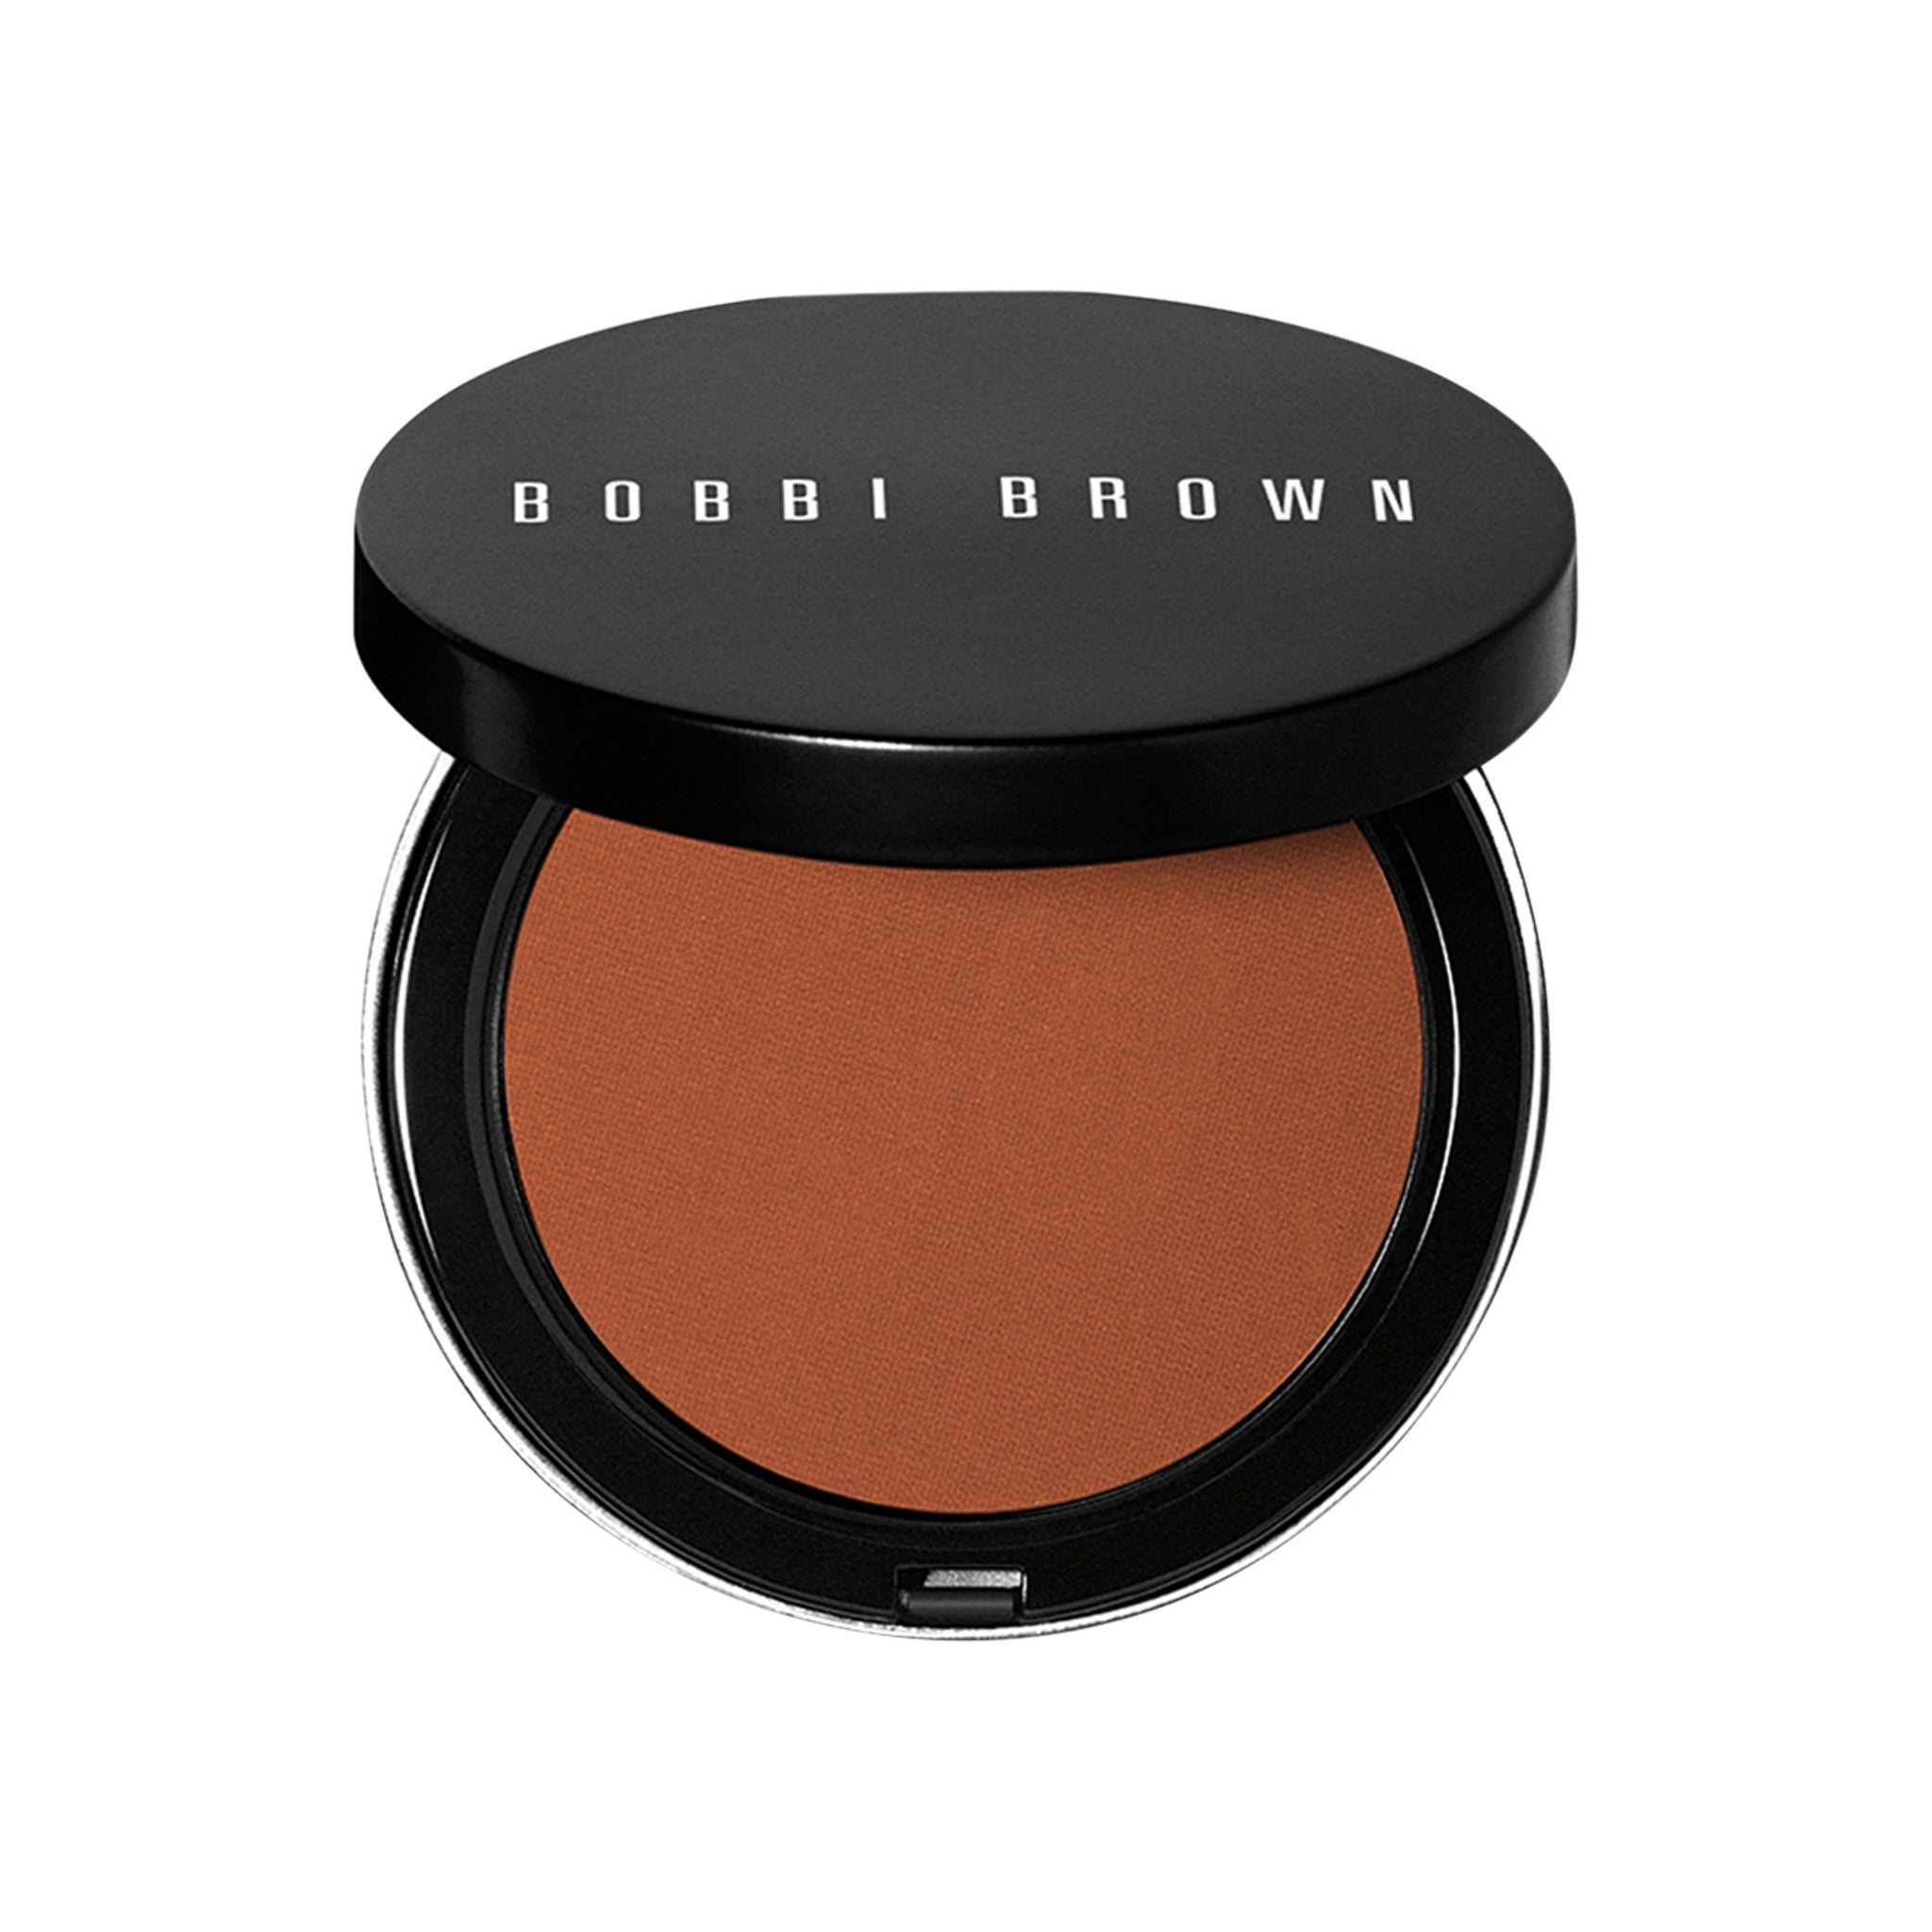 Bobbi Brown Bronzing Powder Color/Shade variant: Deep main image. This product is in the color red, for deep complexions